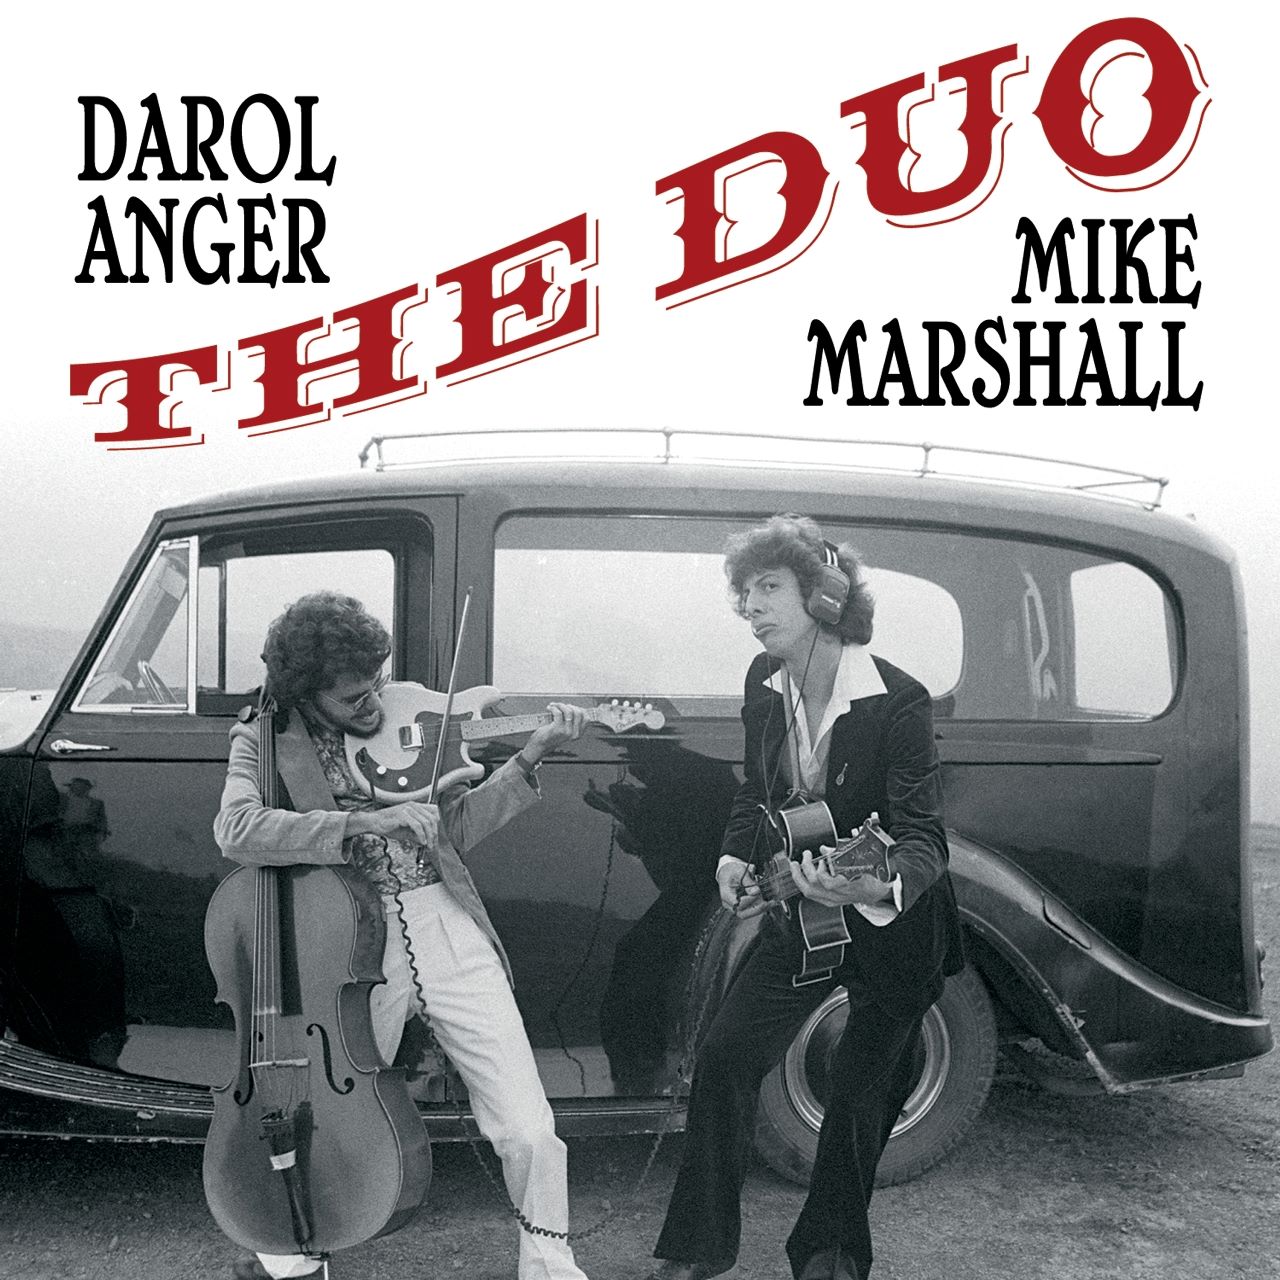 Darol Anger & Mike Marshall - The Duo cover album